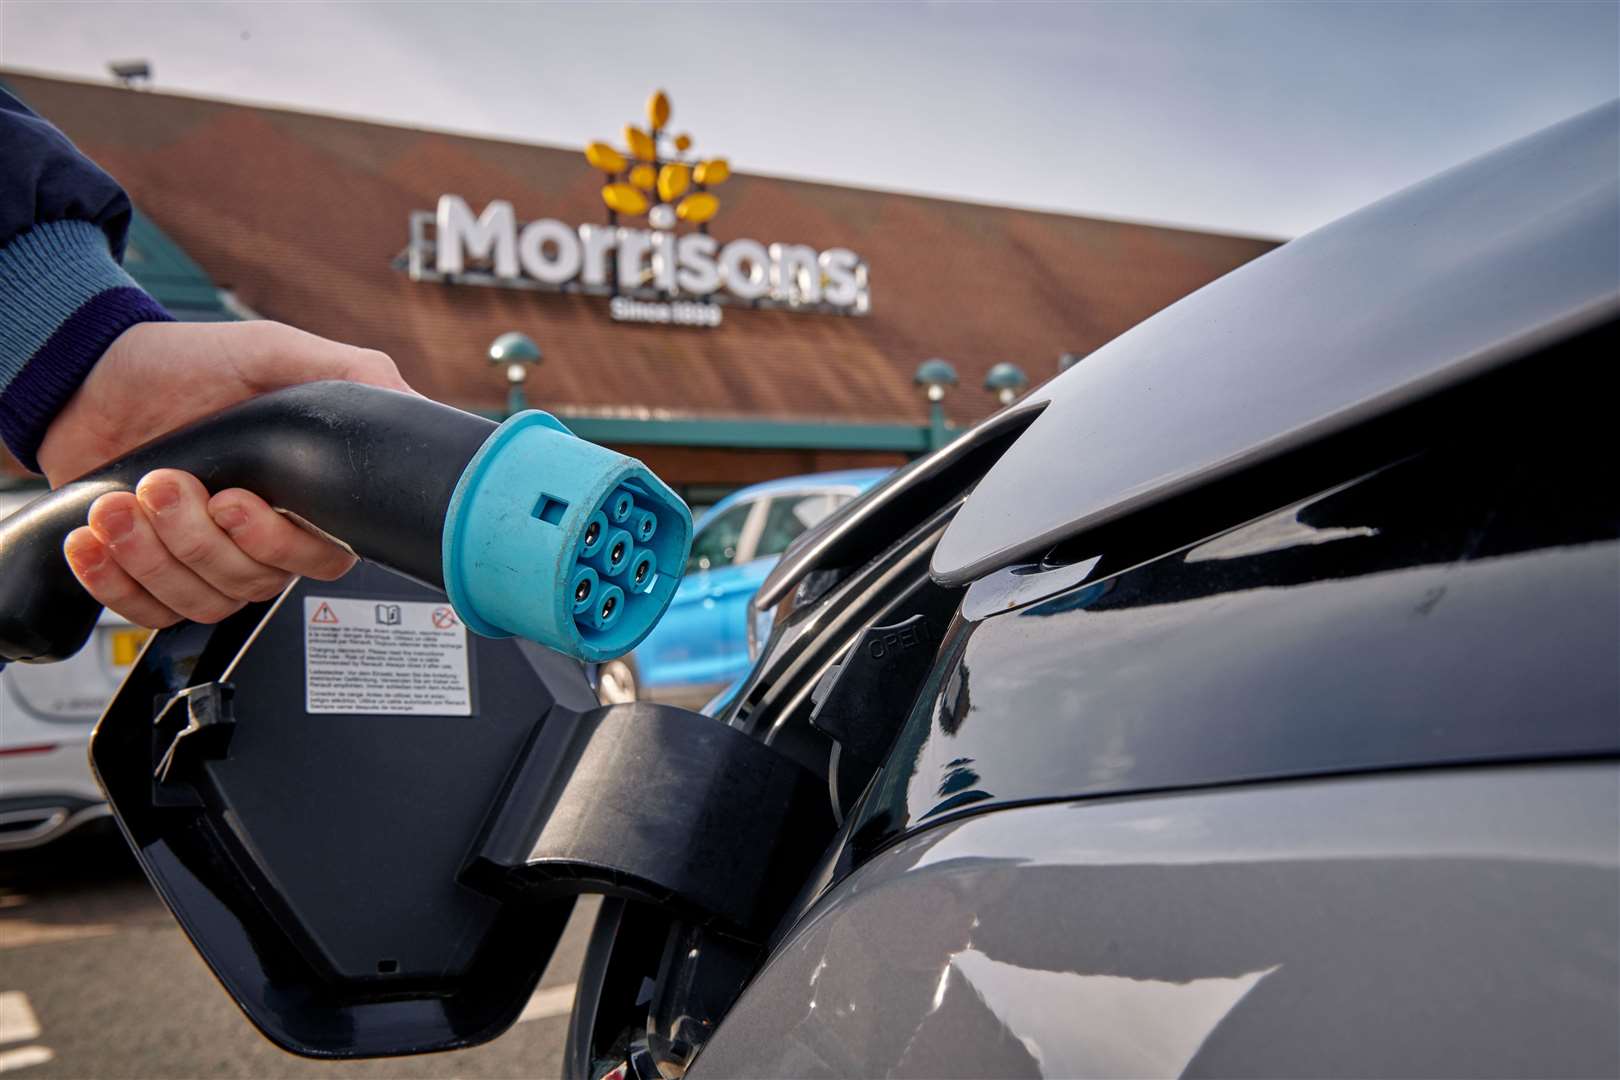 Morrisons says it is building the largest network of rapid chargers